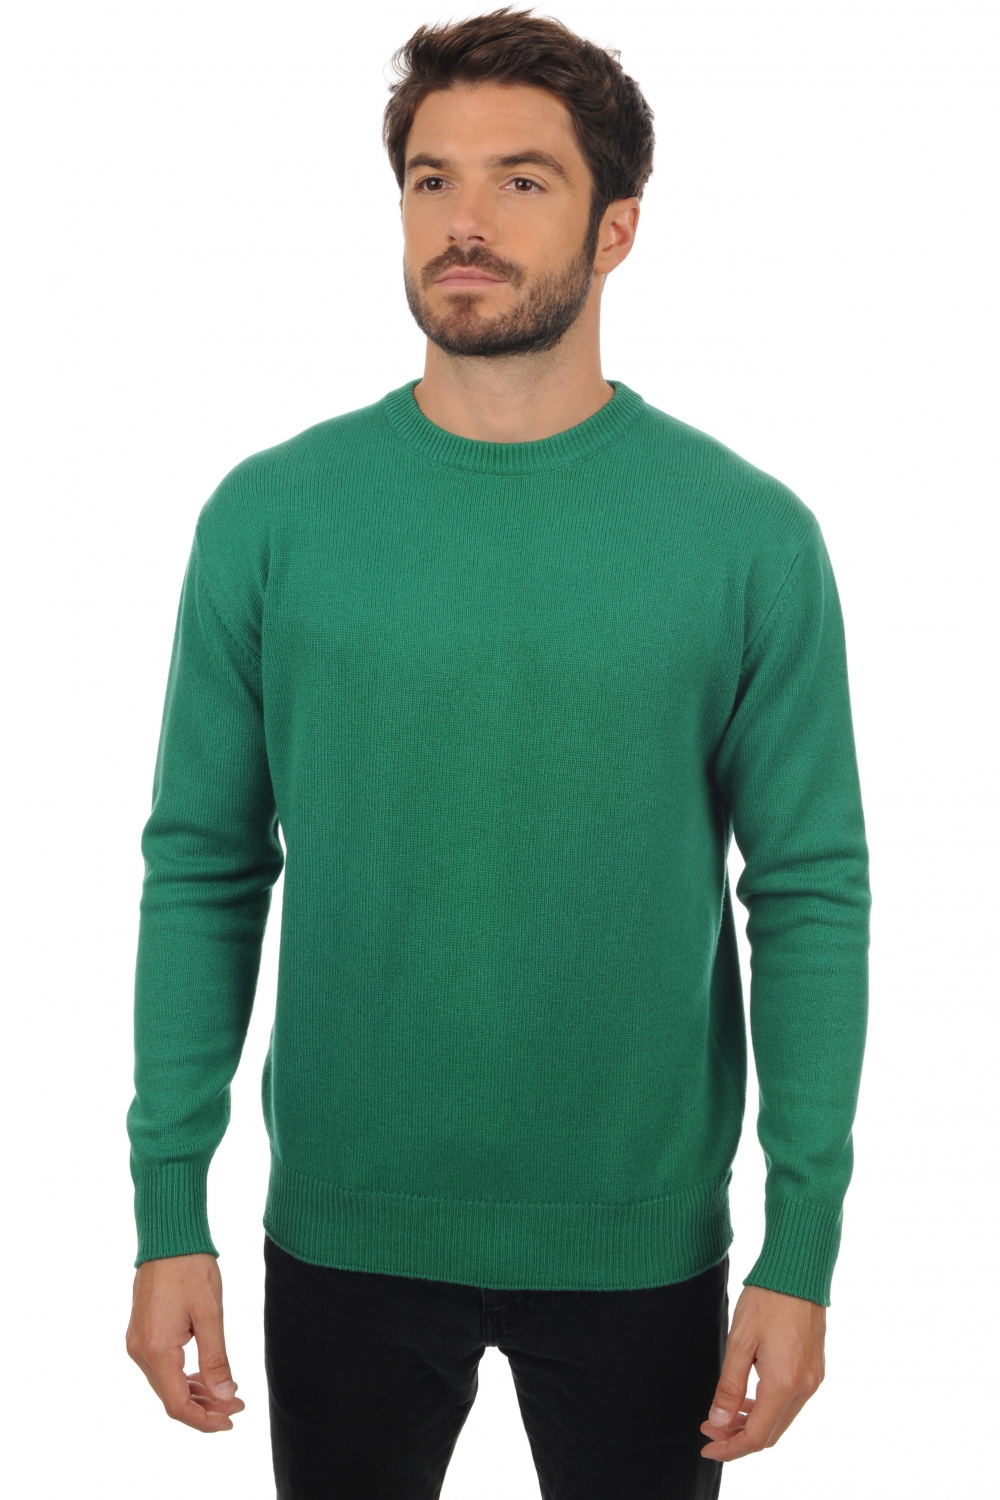 Cachemire pull homme col rond nestor 4f vert anglais 4xl